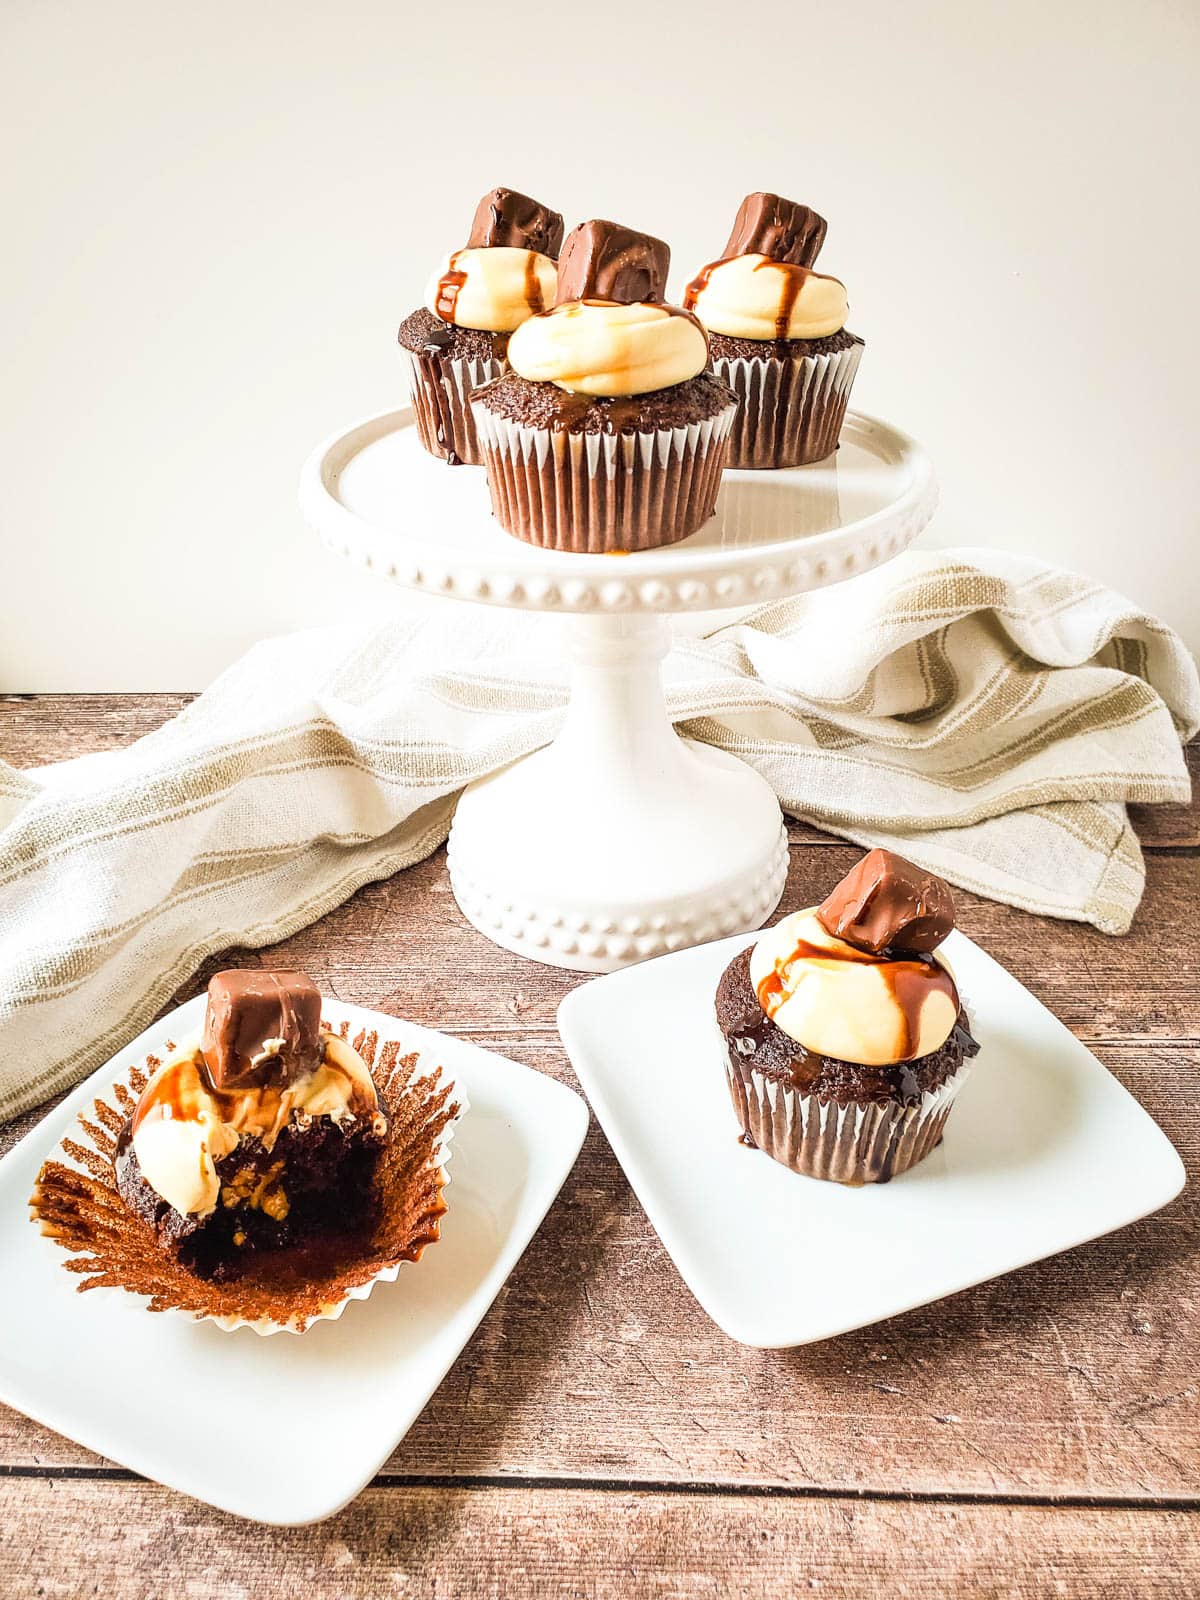 Three chocolate cupcakes stuffed with caramel and peanuts on a cake stand and two on serving plates.